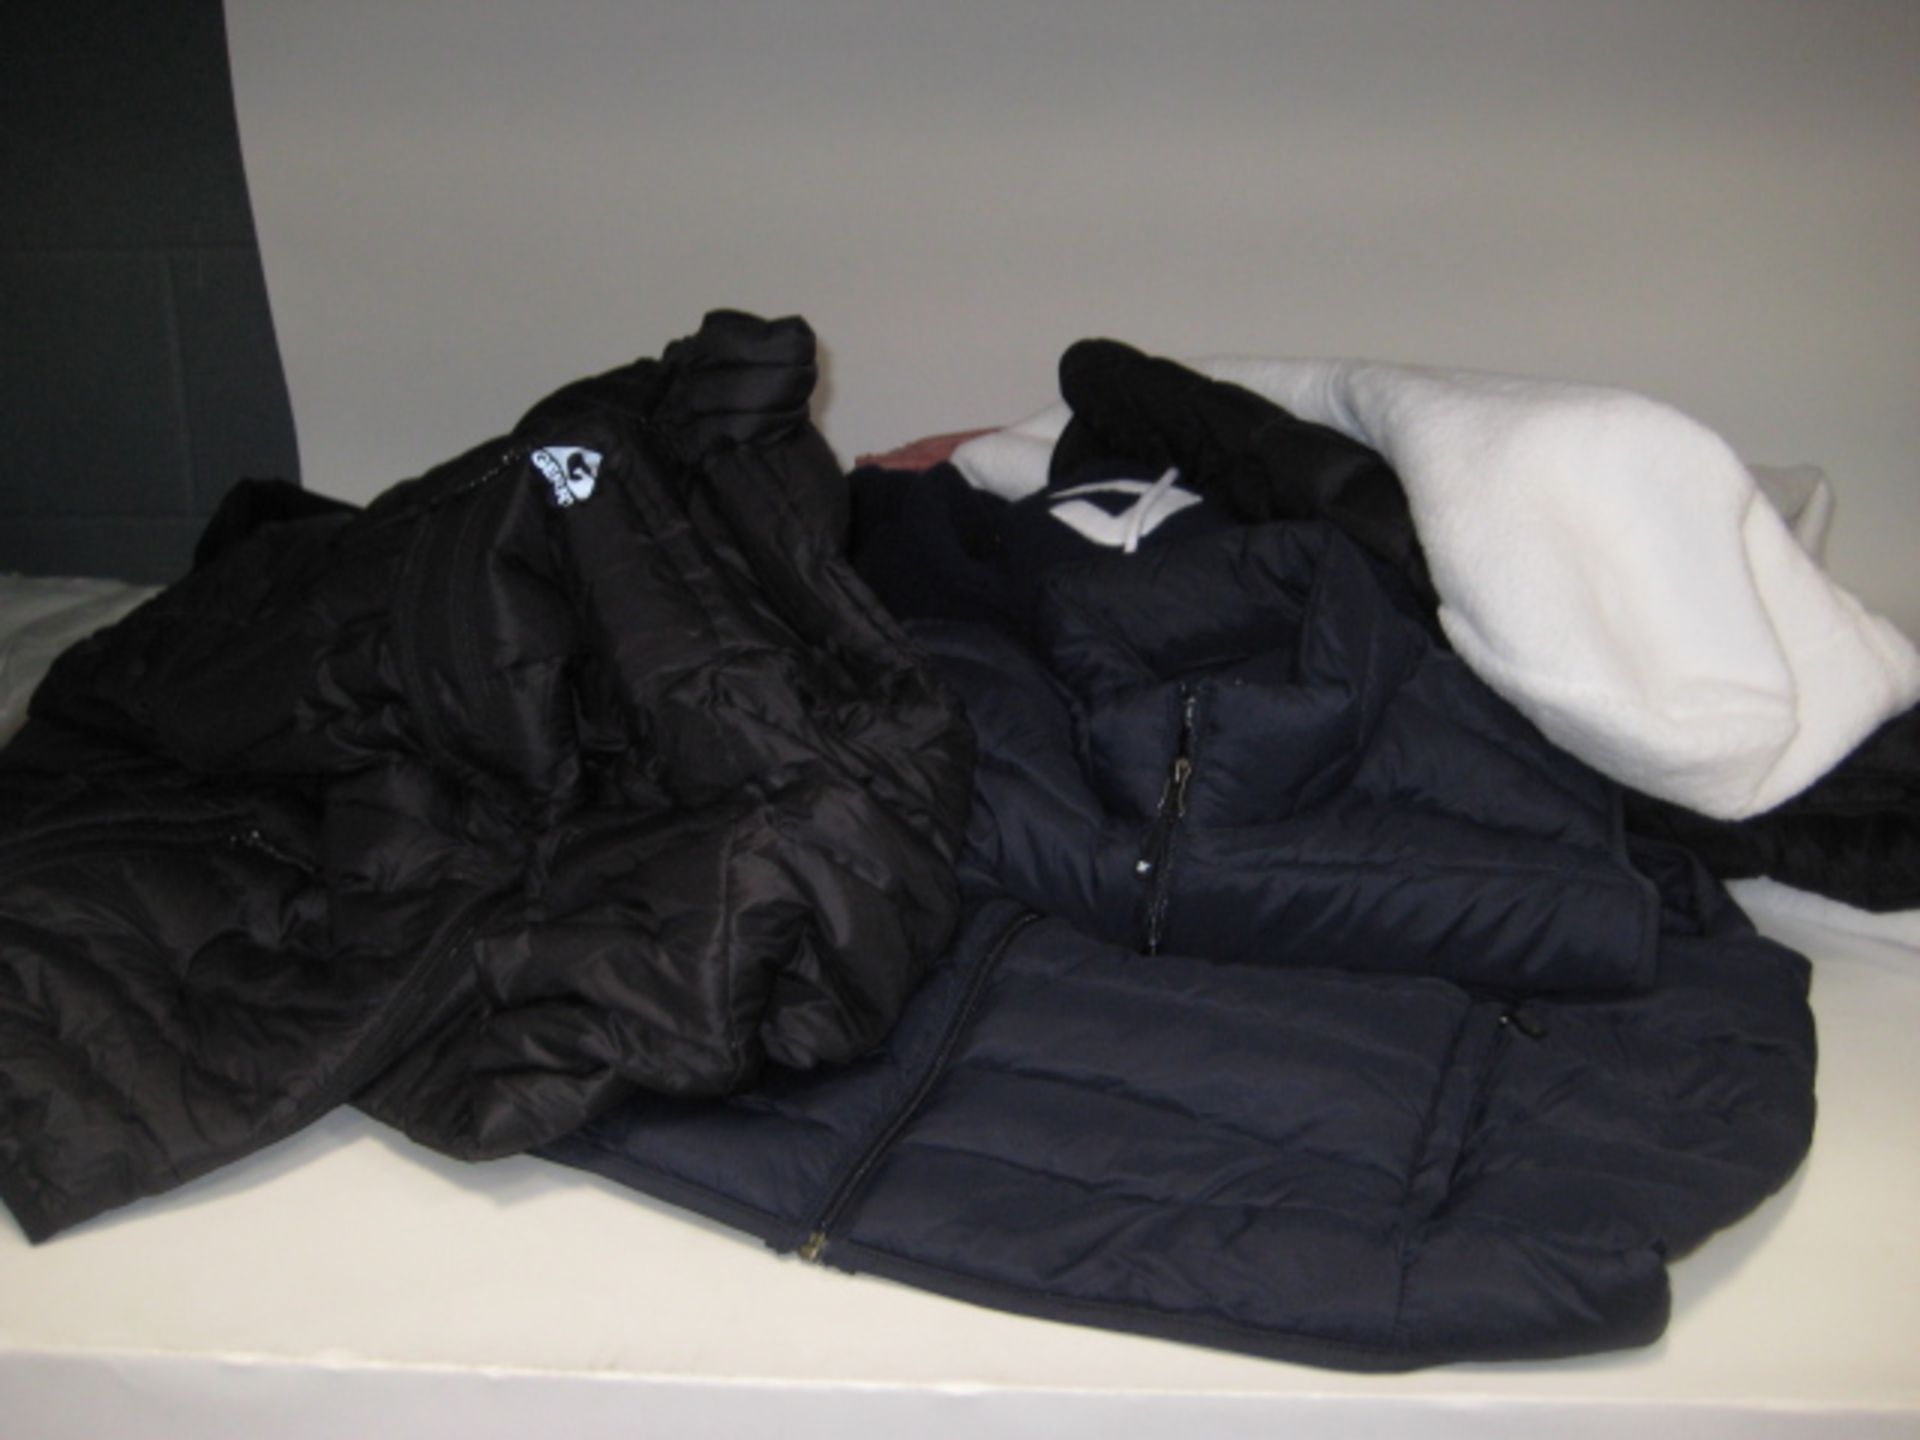 Approx 8 quilted and fleece jackets and gilets made by Gerry 32 degree heat, Fila, Kirkland, etc,